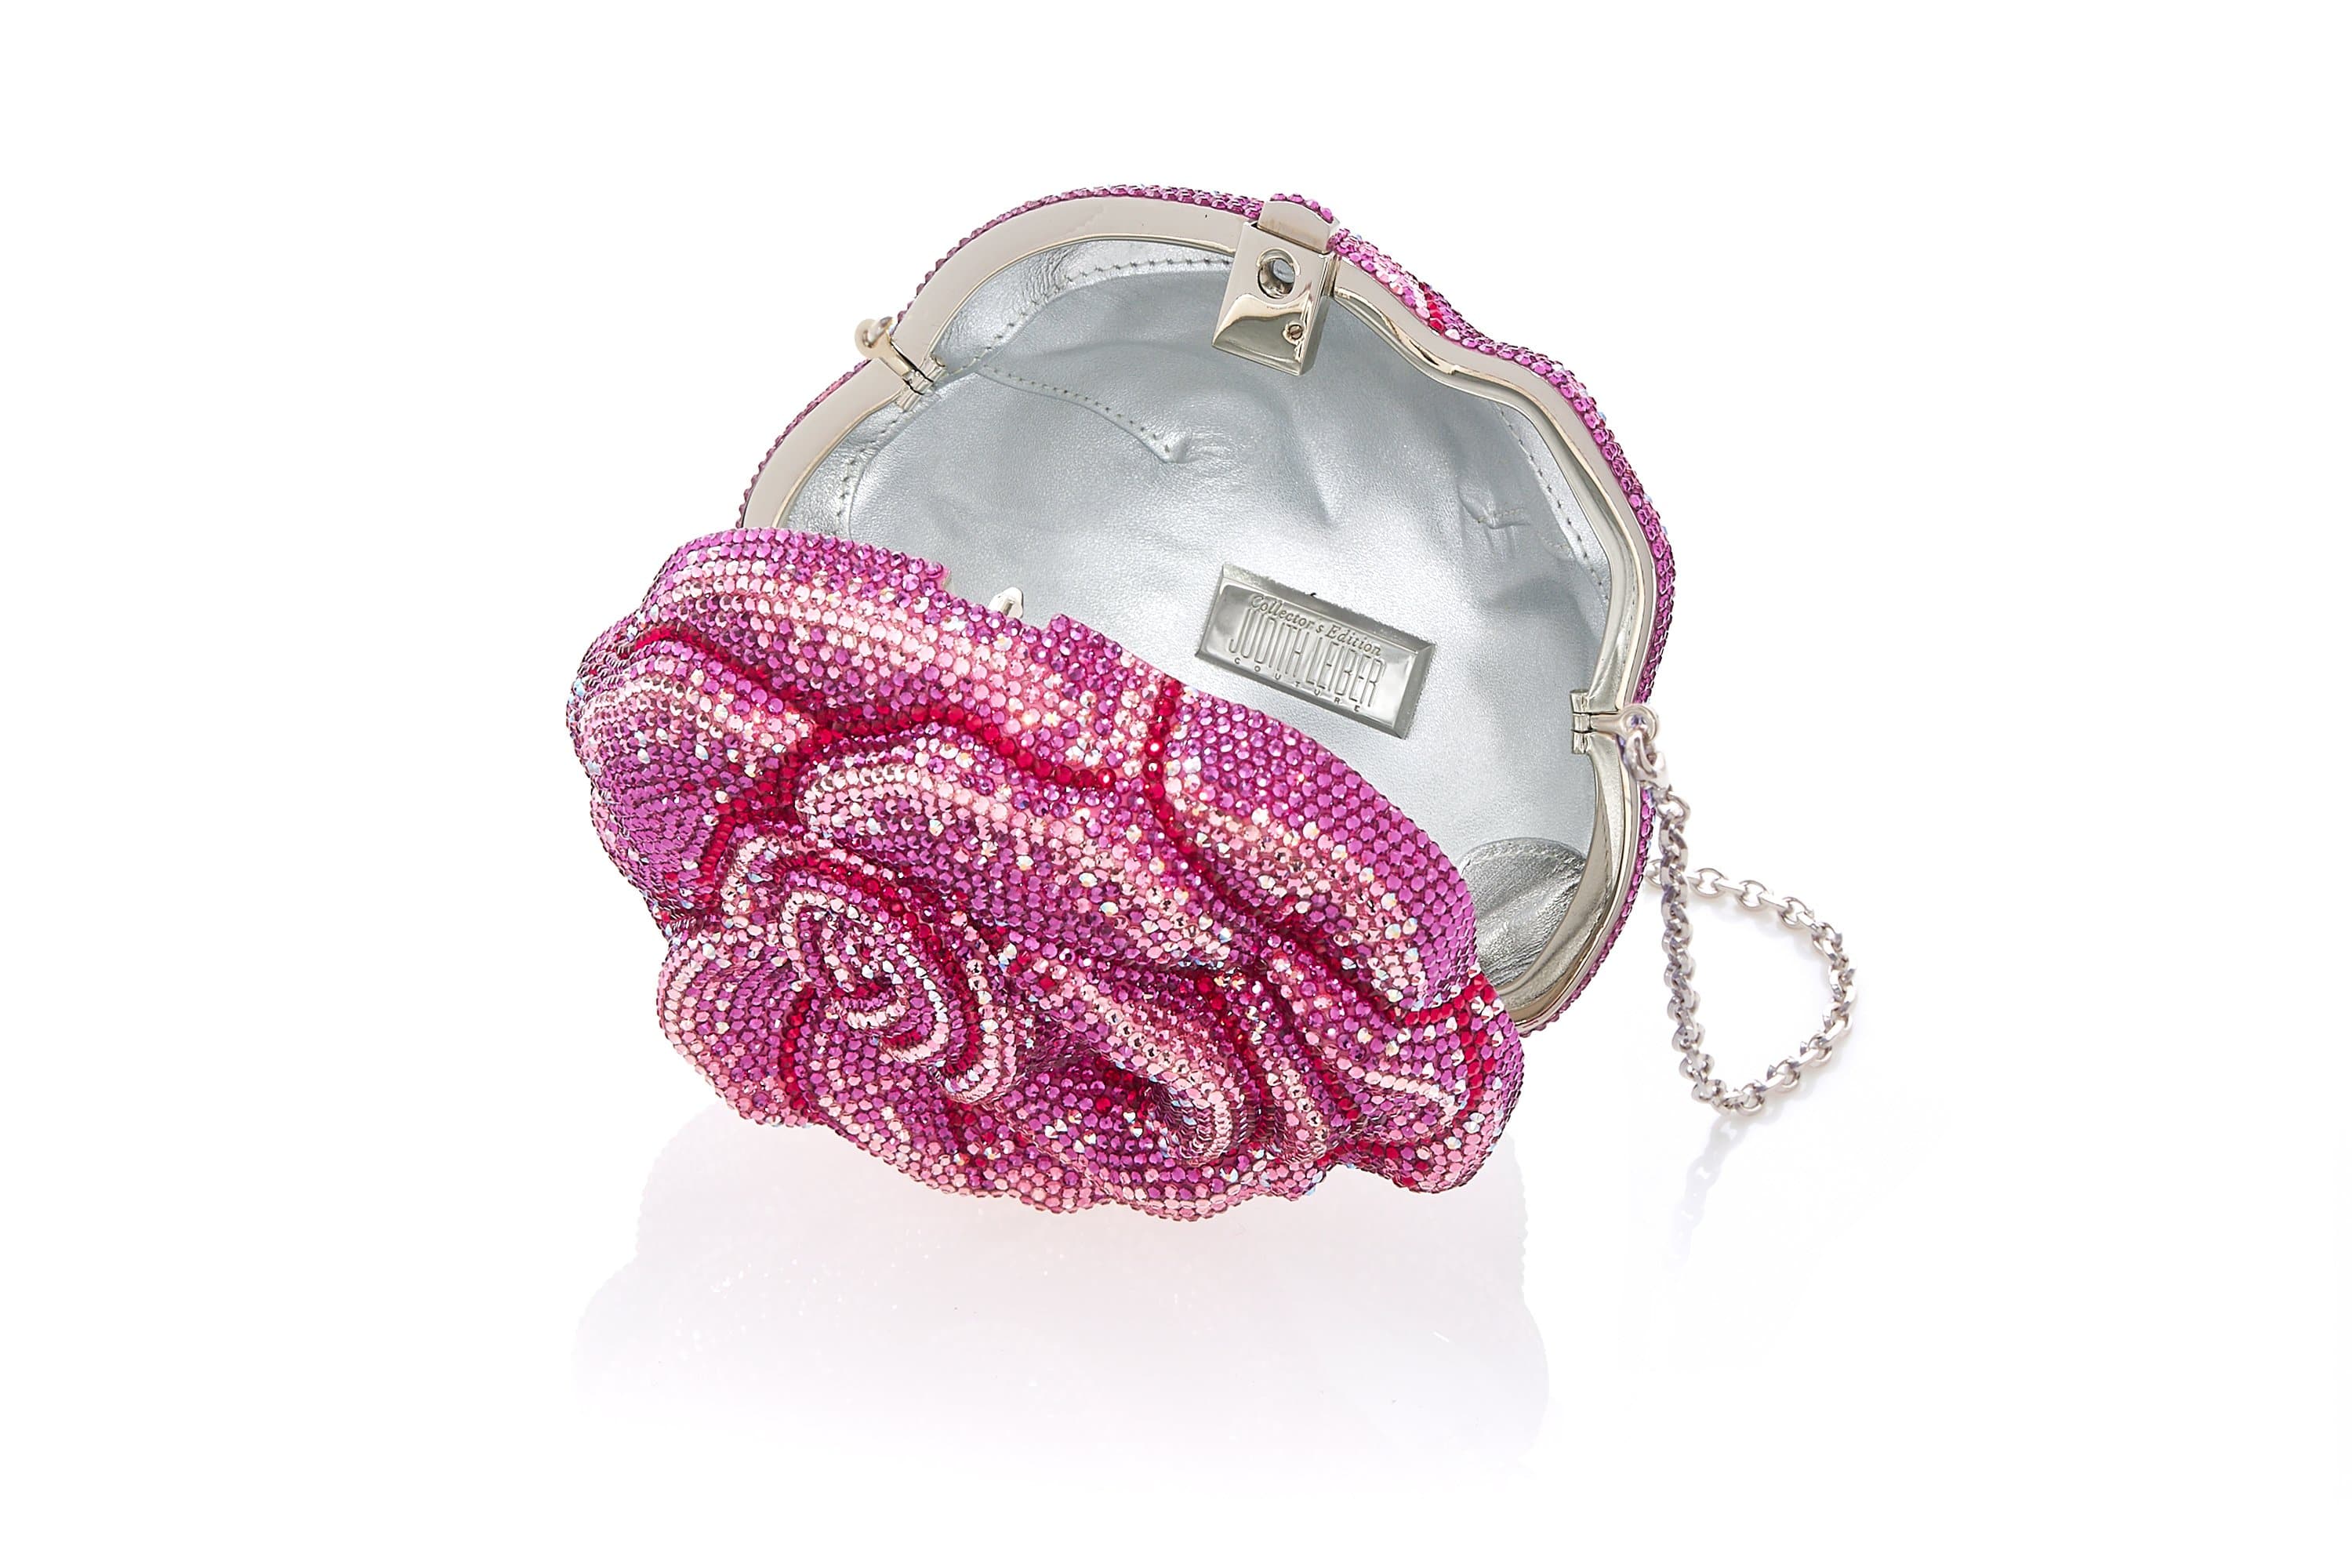 JUDITH LEIBER COUTURE Rose Desiree crystal-embellished silver-tone clutch